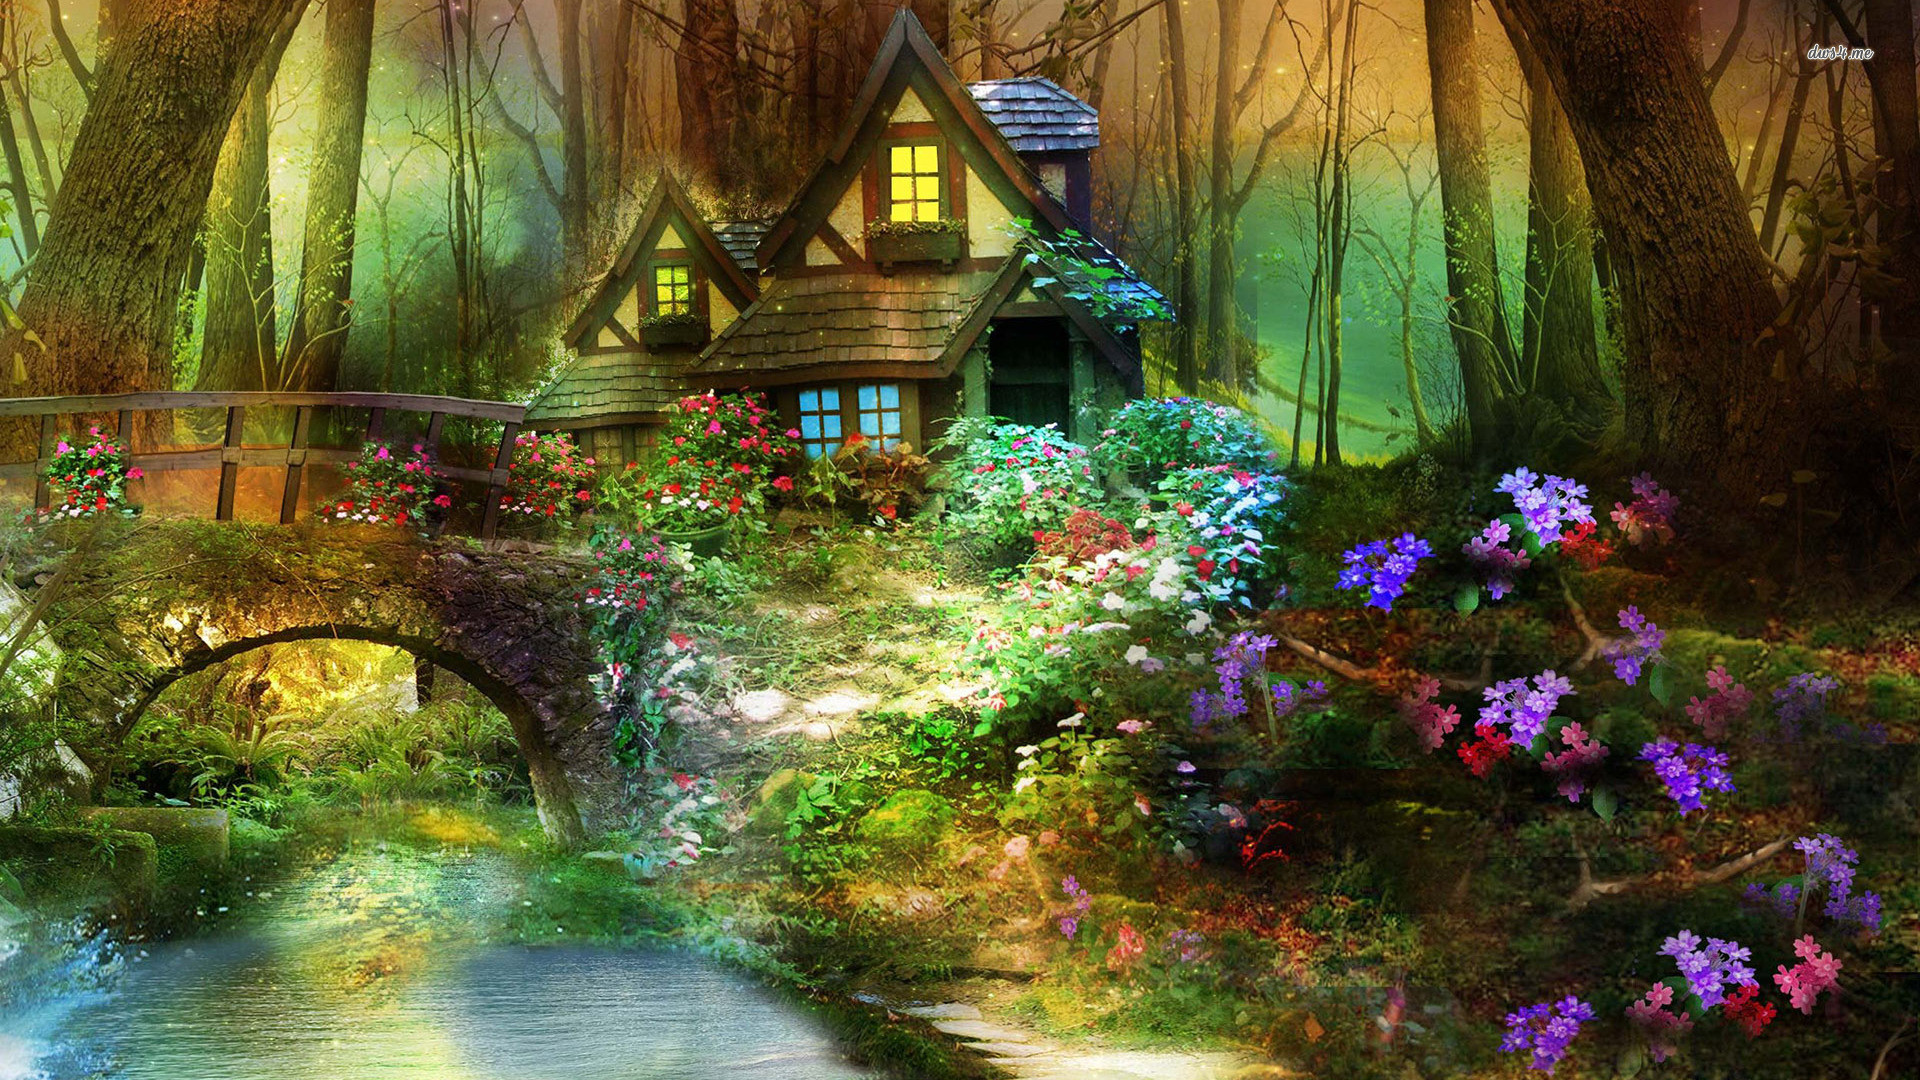 Magical Forest Wallpaper Landscape Nature Wallpaper - Enchanted Forest With House - HD Wallpaper 